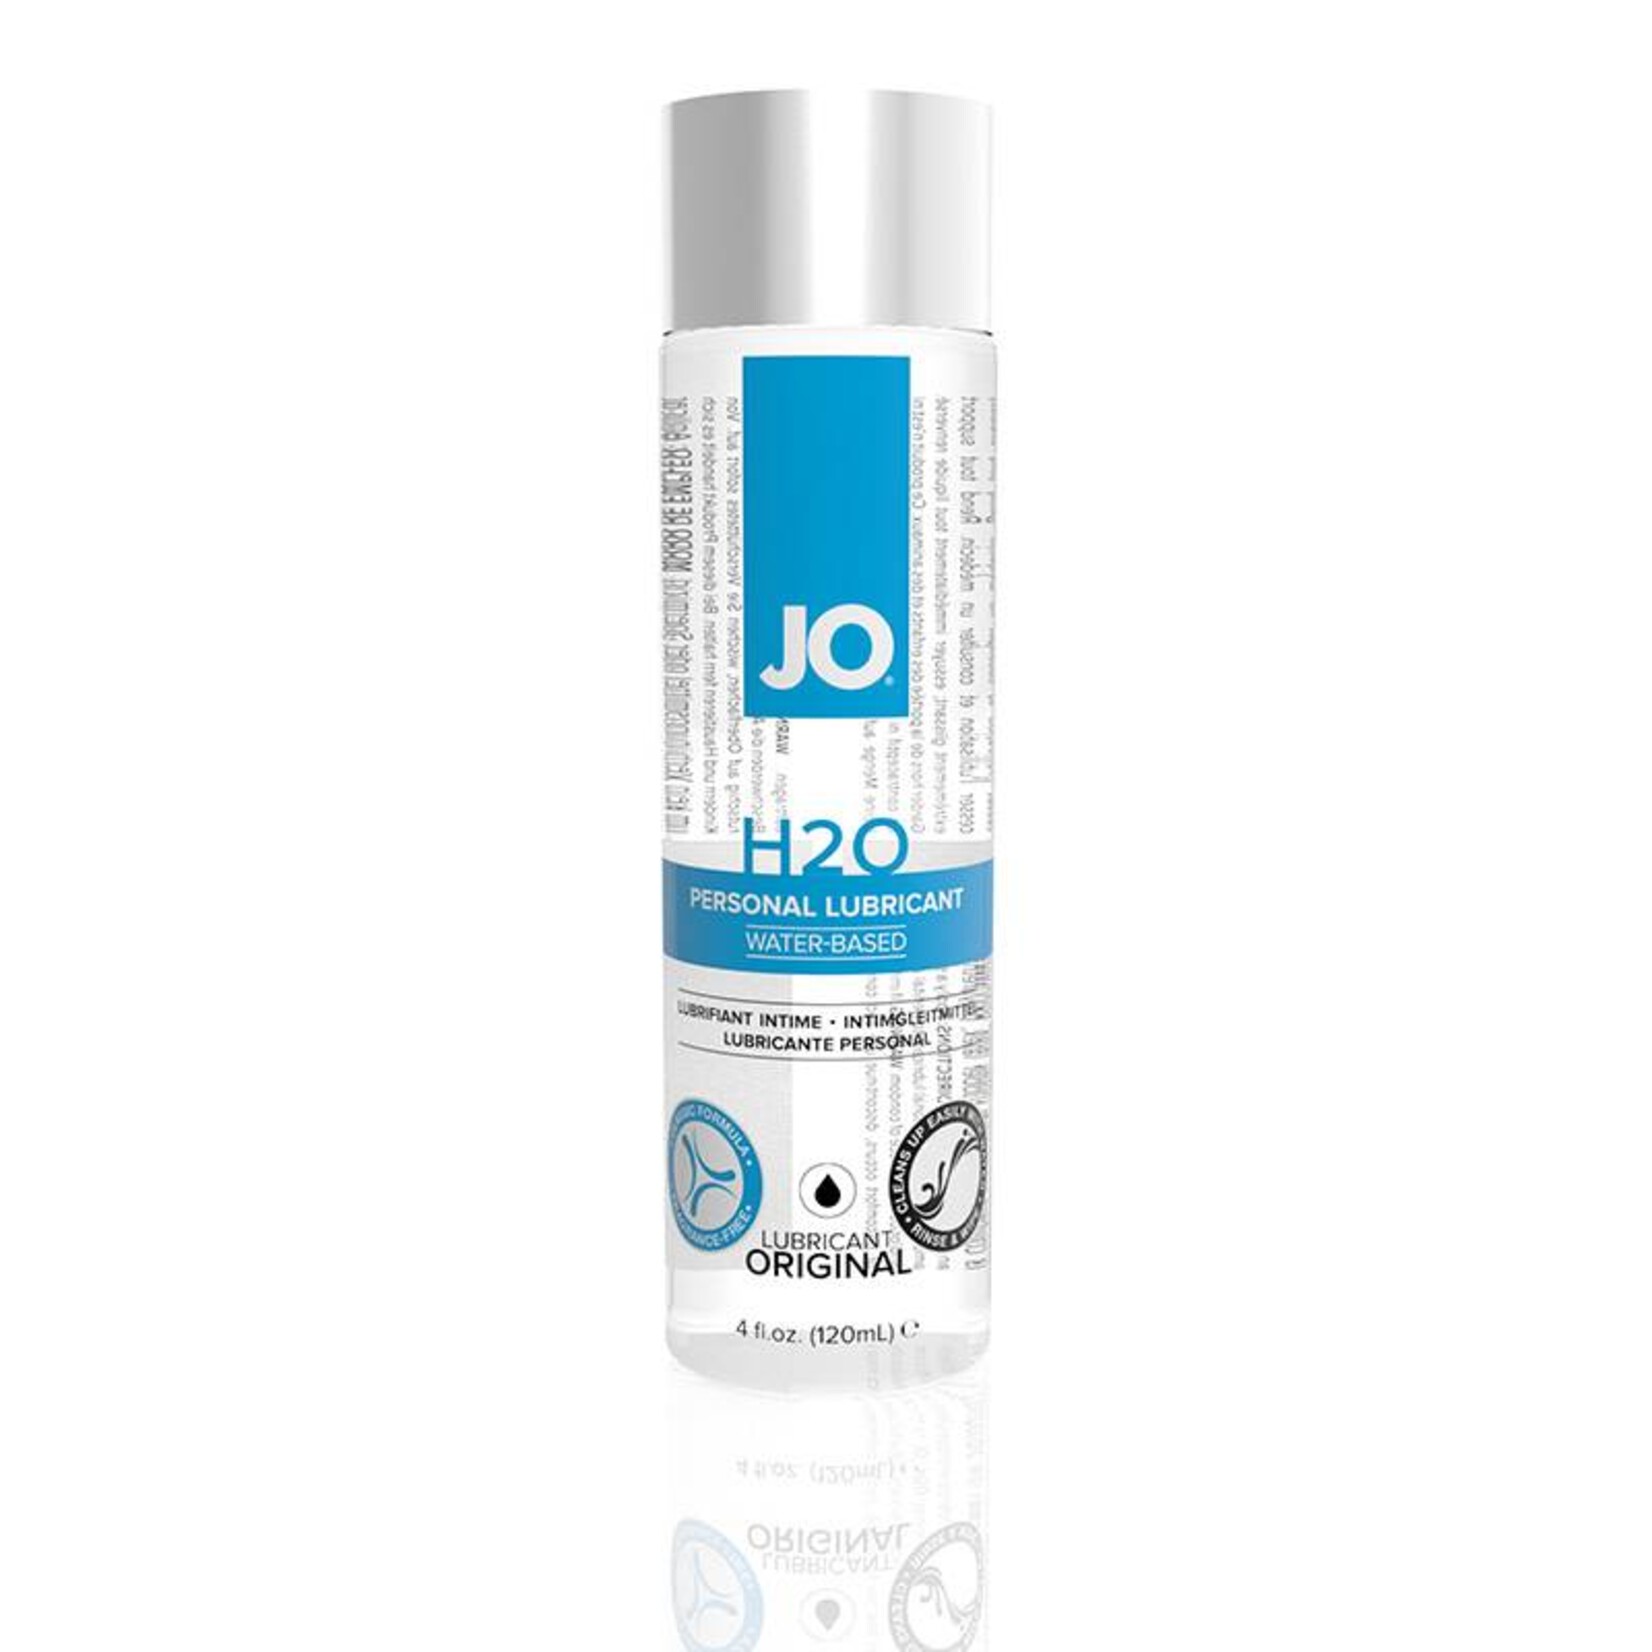 System JO JO H2O Water-Based Personal Lubricant 4oz